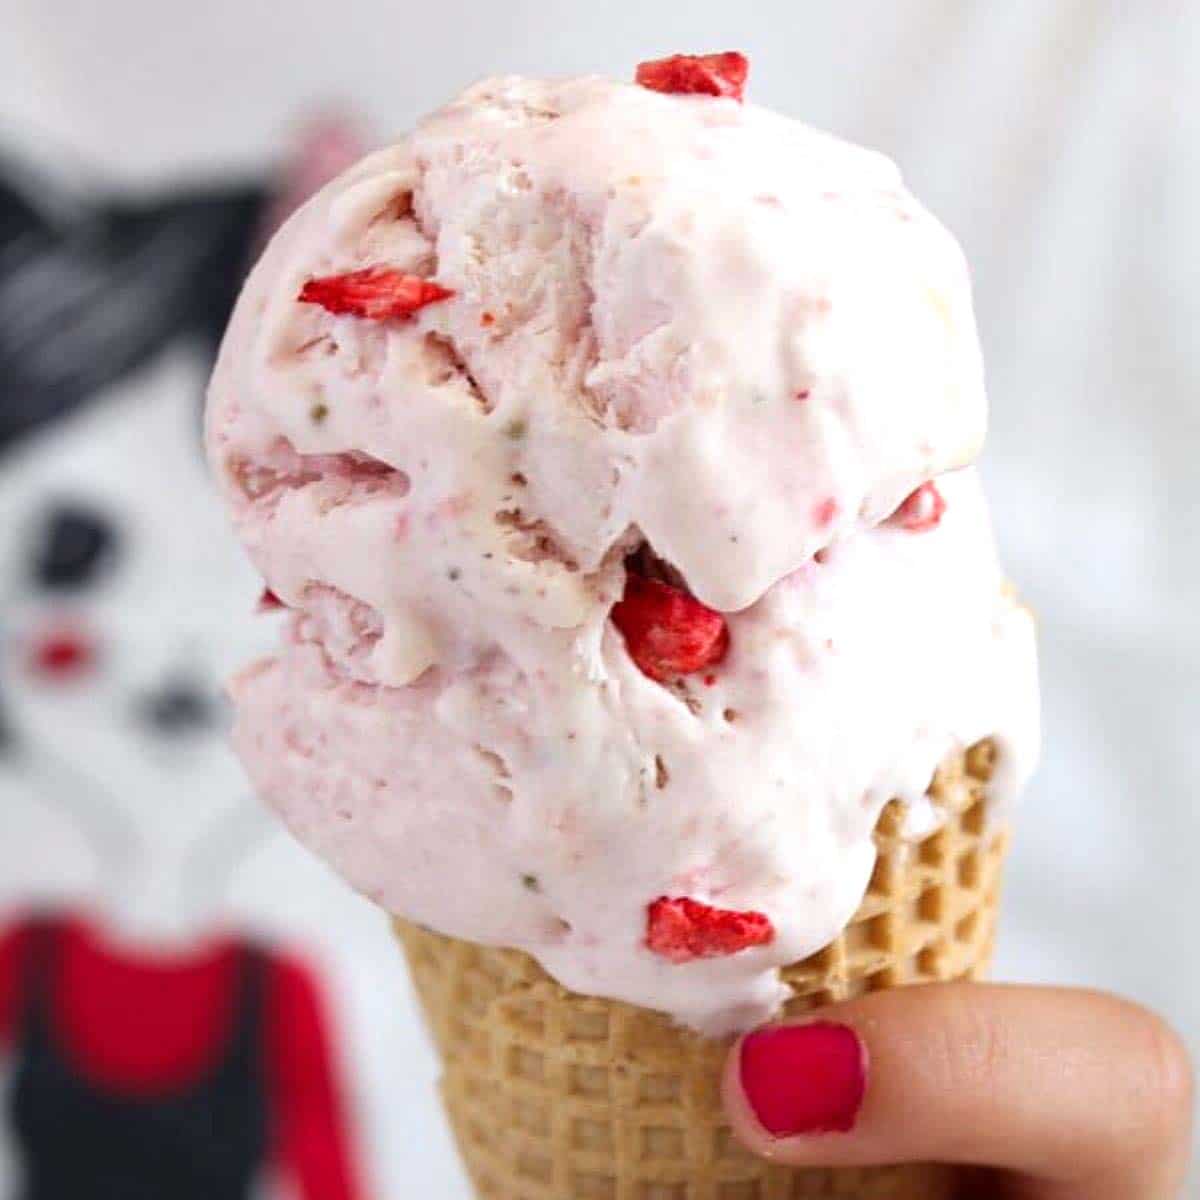 Strawberry ice cream with chunks of strawberries in each scoop